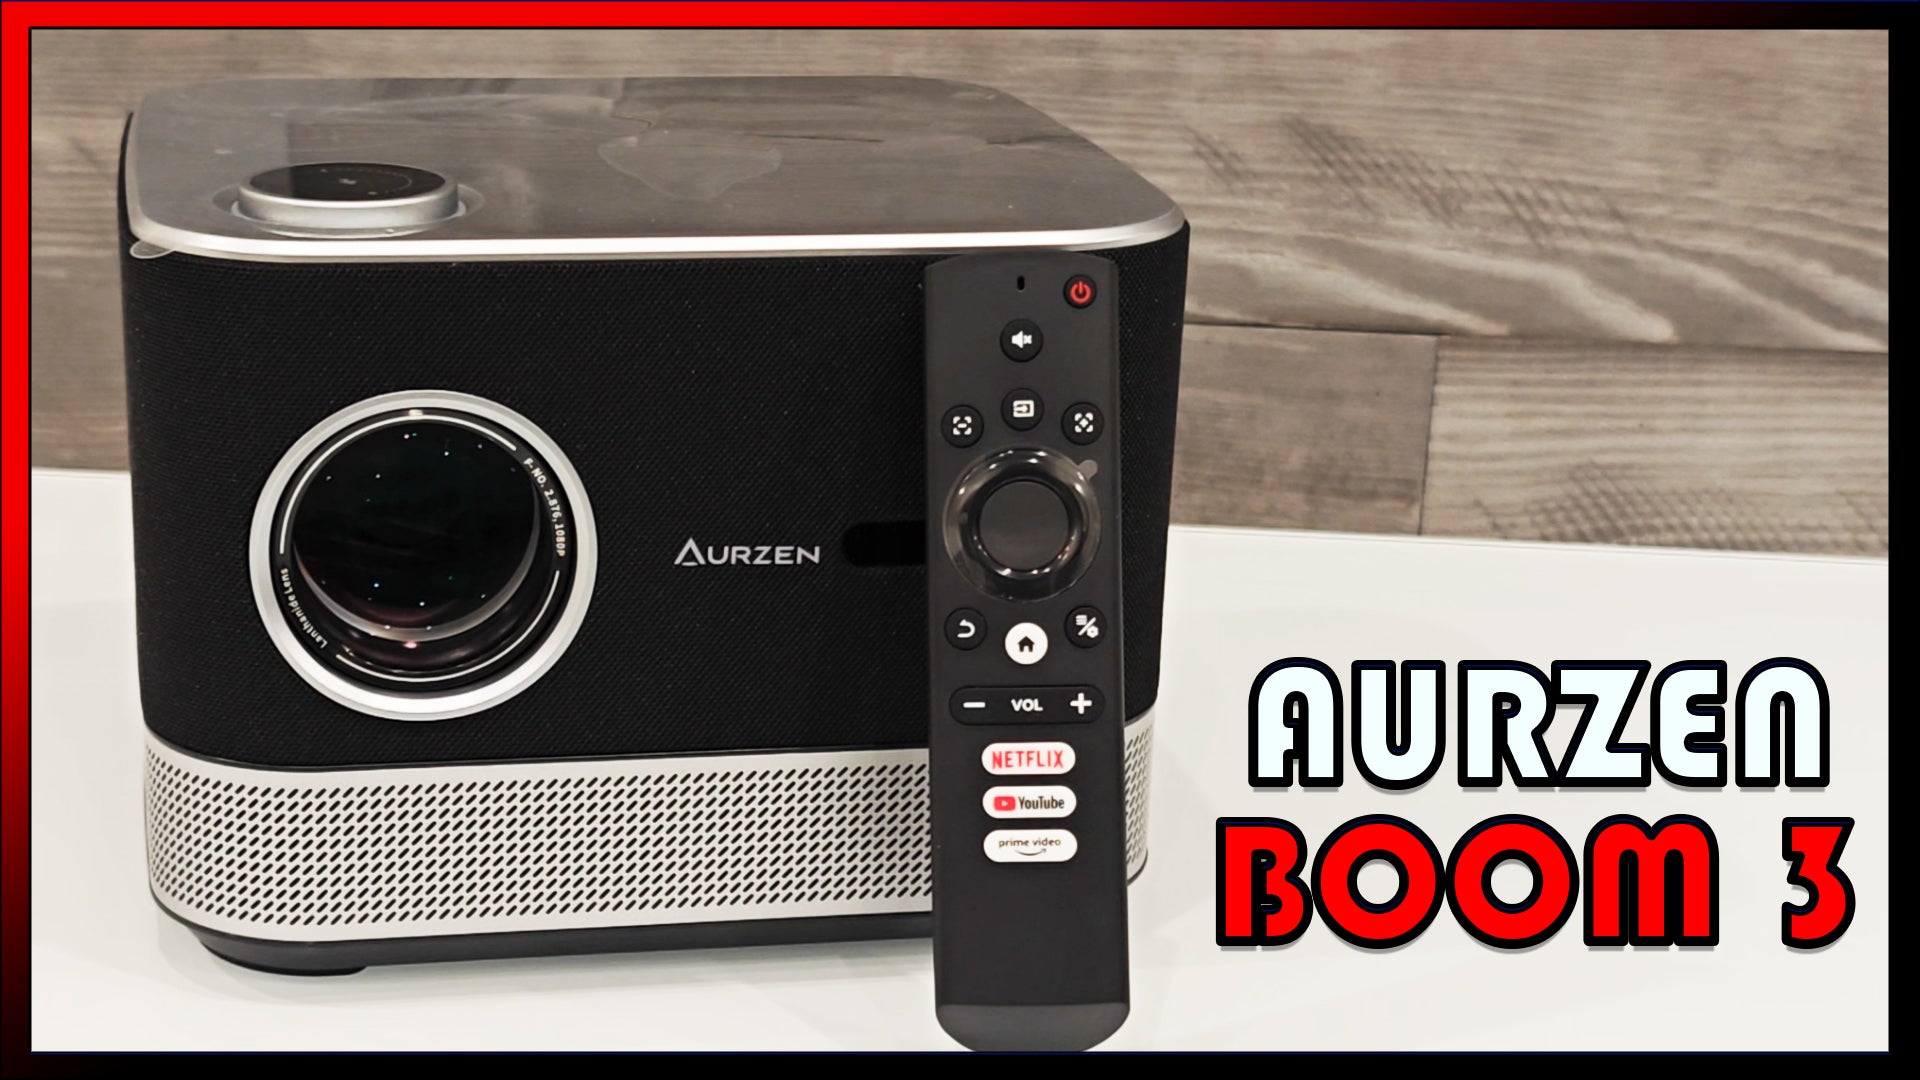 Load video: Aurzen Boom 3 All In One Smart 4K Projector 3D Dolby Audio Review